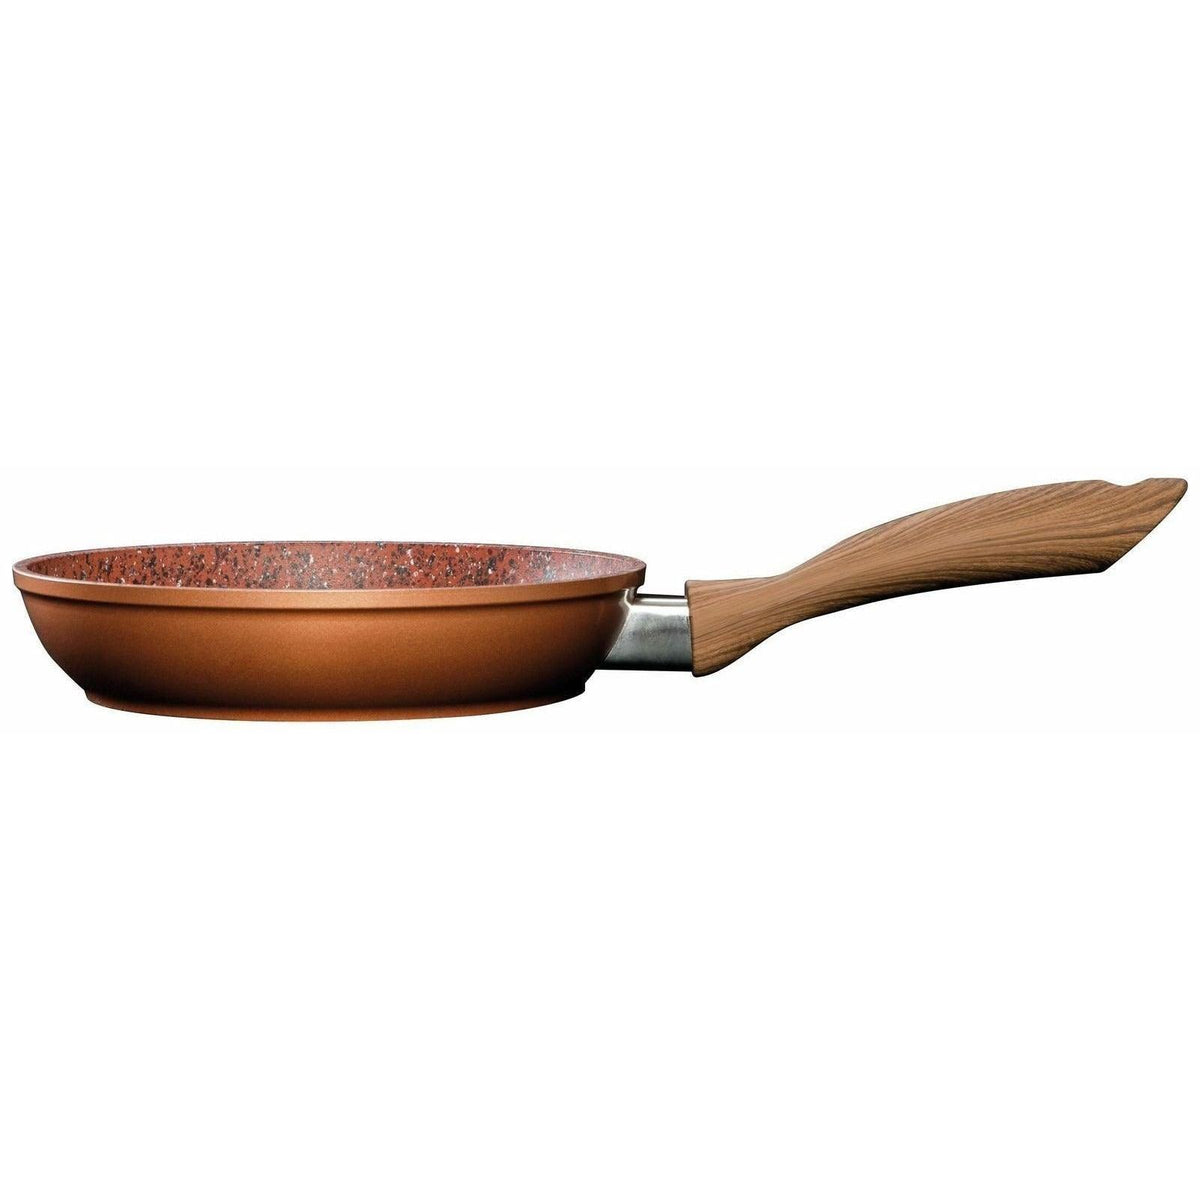 JML Non-Stick 28cm Copper Stone Frying Pan - Copper | V18994 from DID Electrical - guaranteed Irish, guaranteed quality service. (6890816241852)